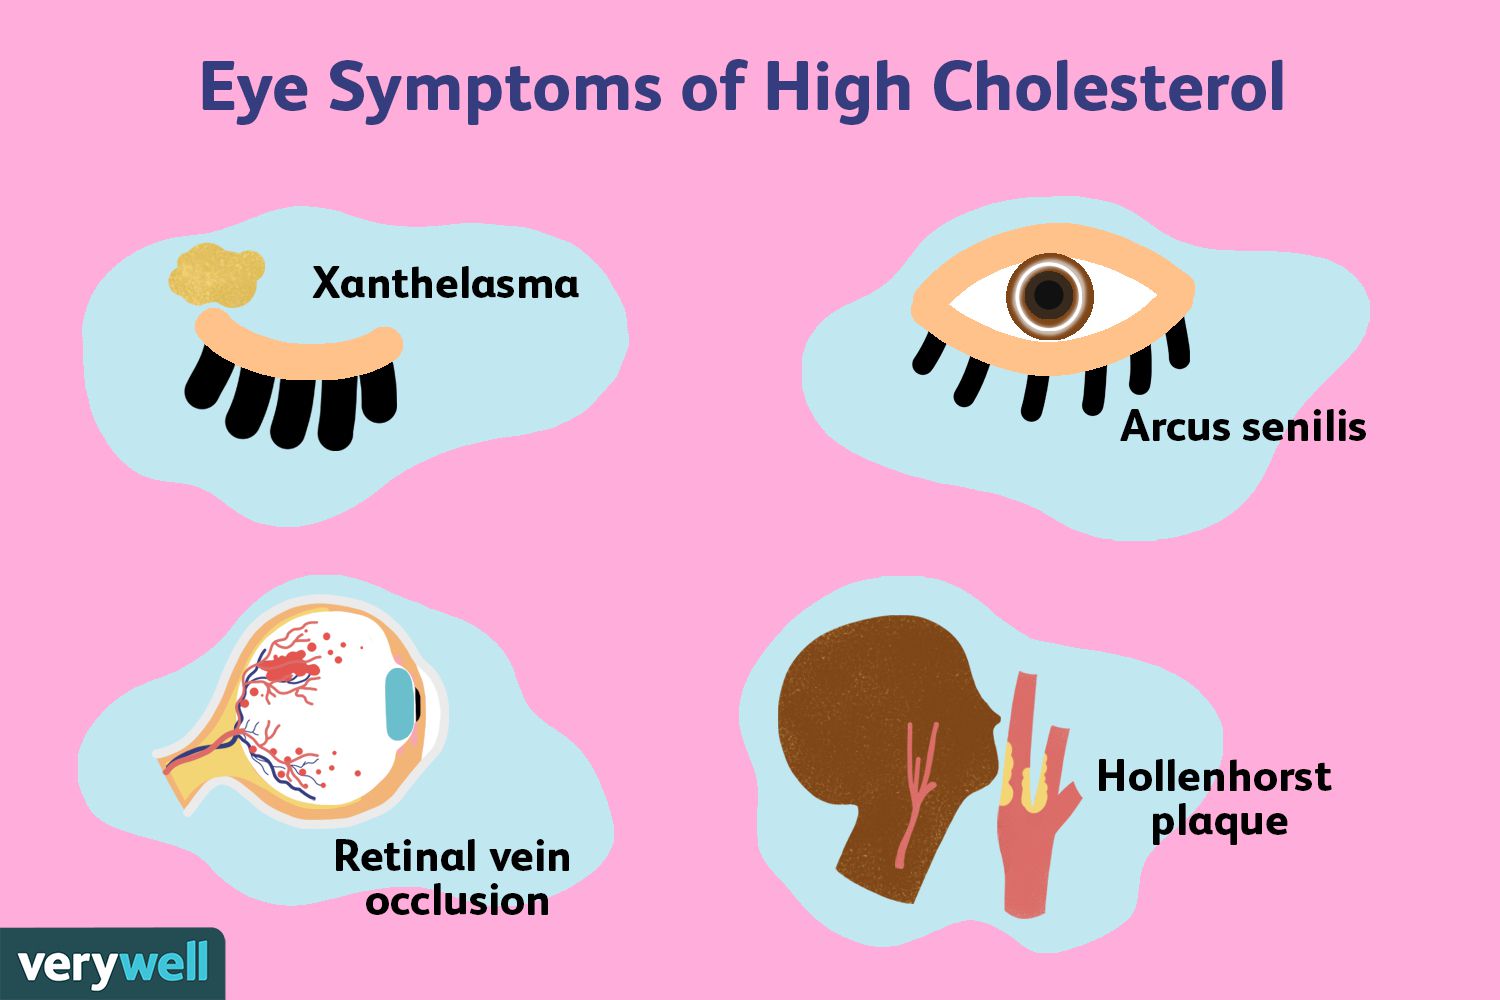 Check Your Body, Not Just Your Blood - Key Signs You Might Have High Cholesterol